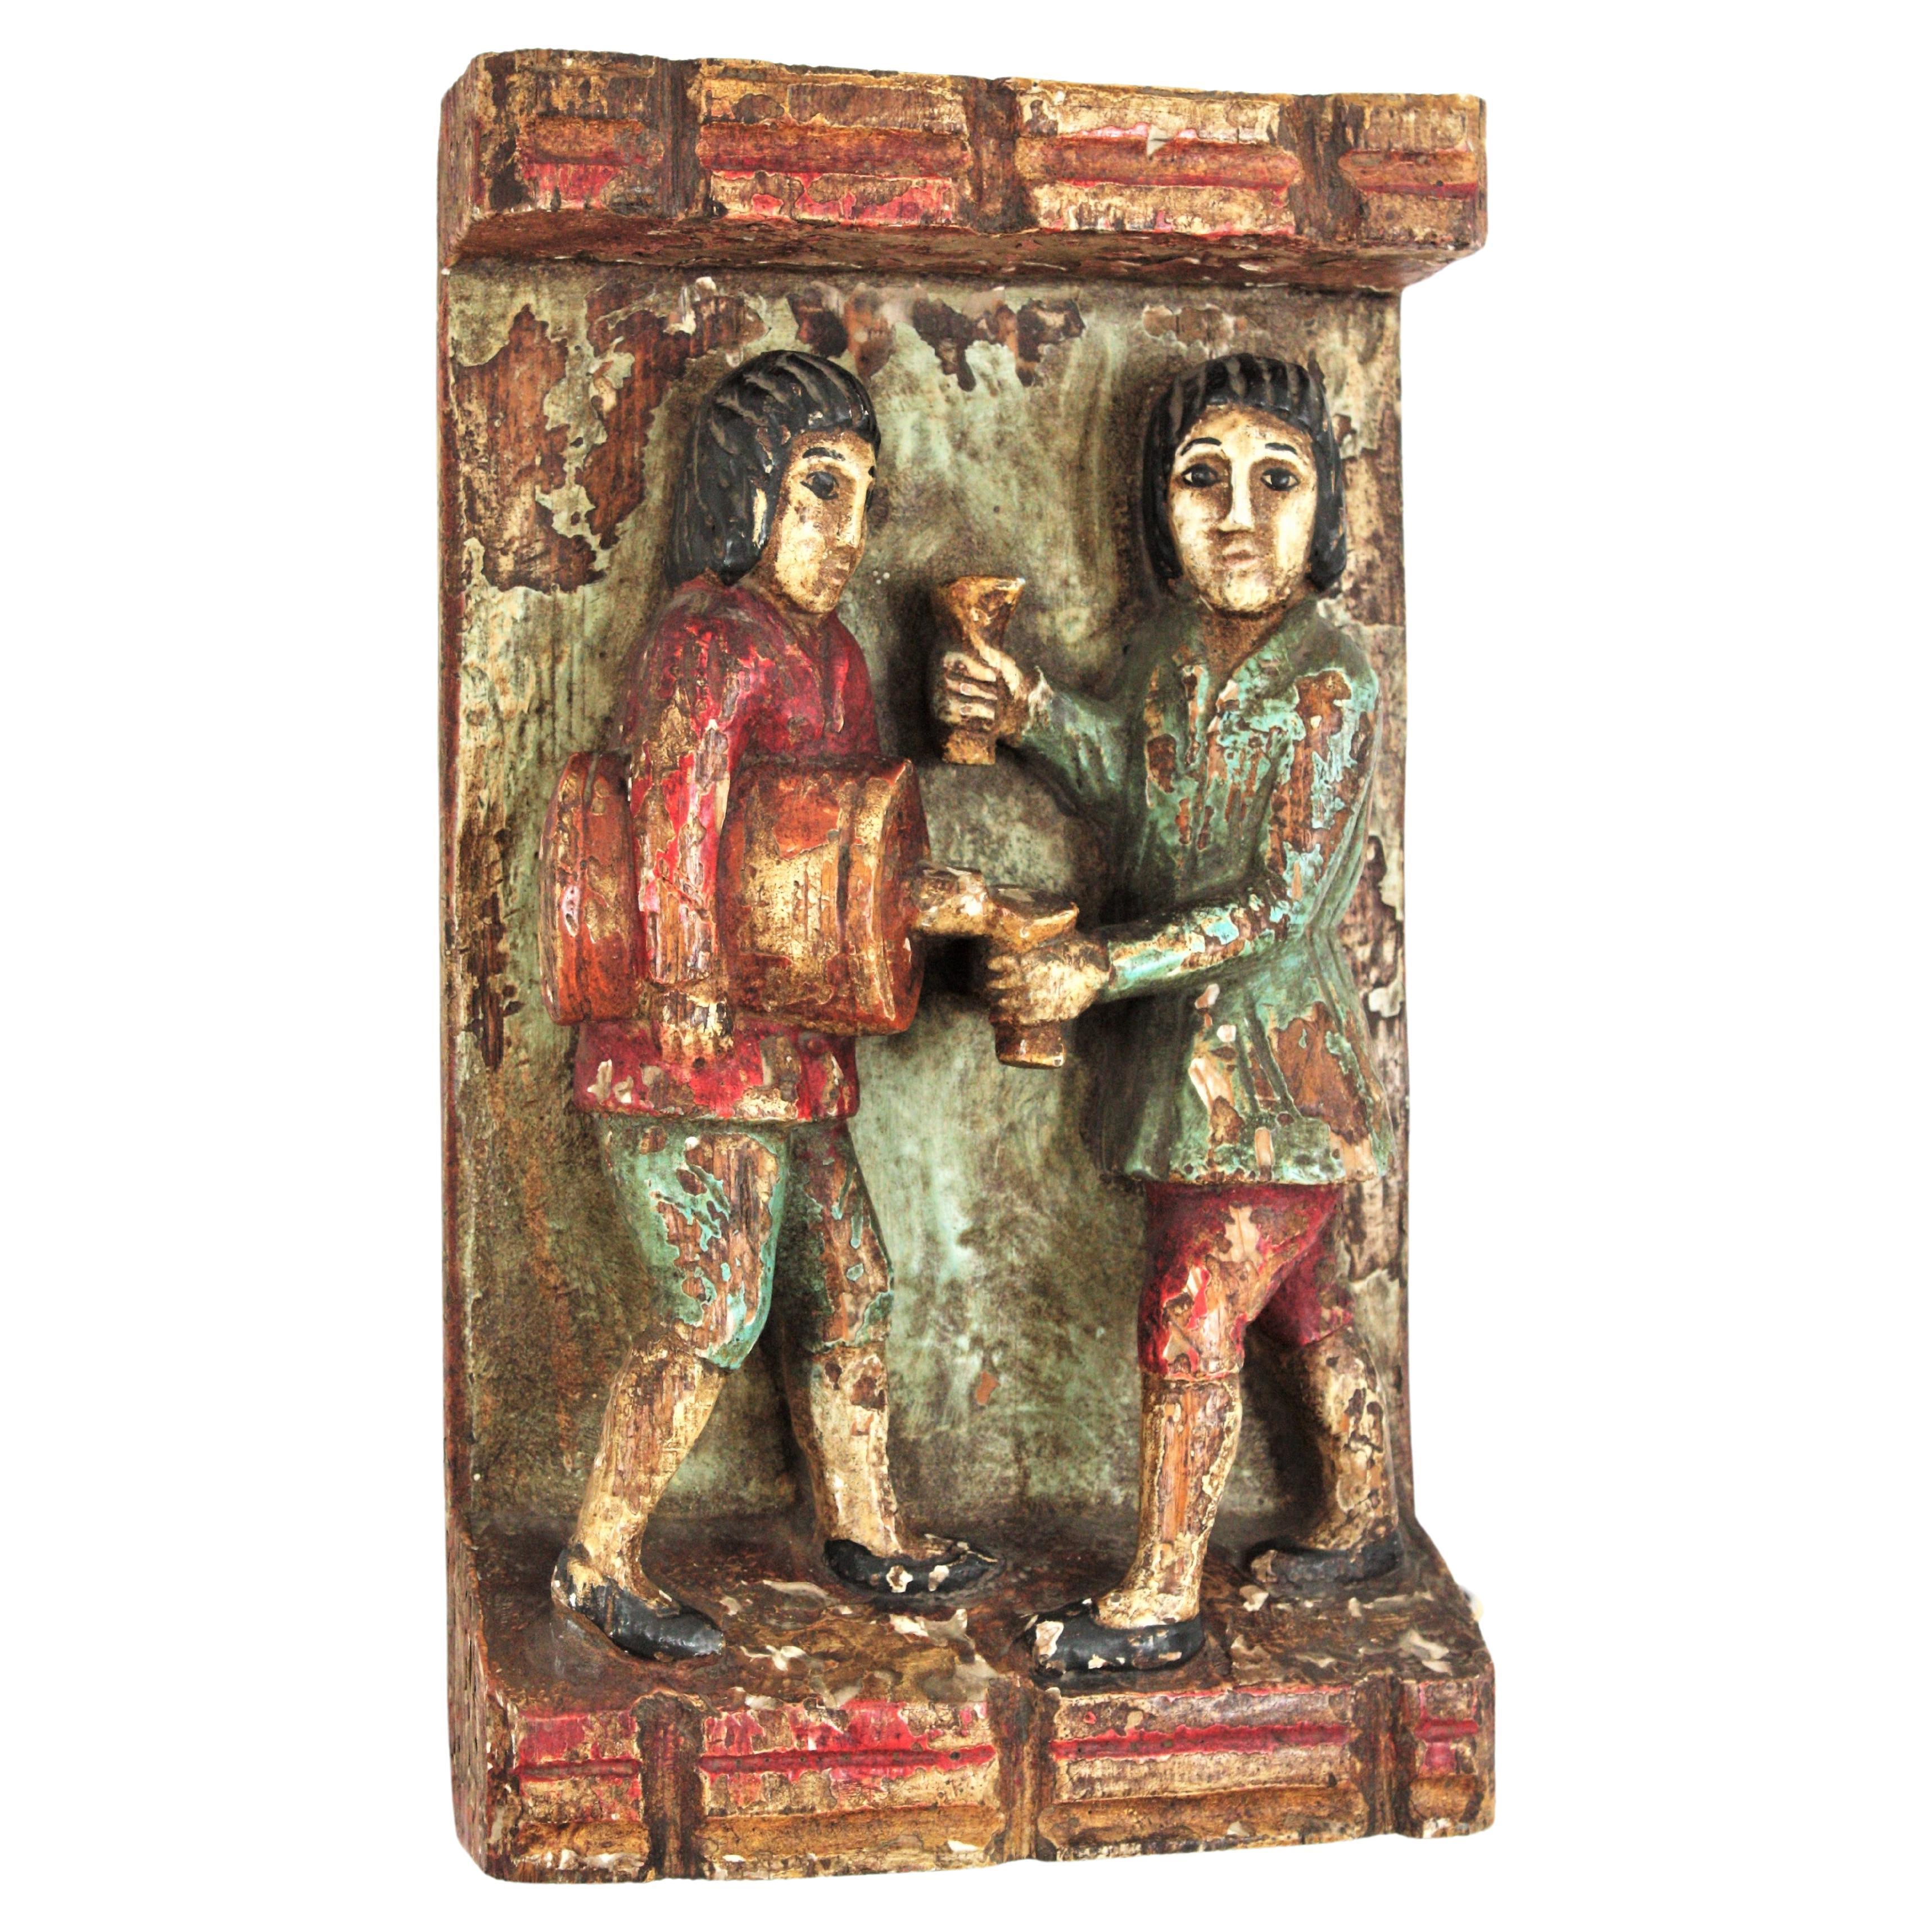 Mid-Century Modern Medieval Inspired Bas Relief Wall Decoration in Polychromed Carved Wood. Spain, 1950s.
Beautifully hand-carved bas relief depicting genre scene. Two standing men figures, one serving wine from a barrel, the other one hanging two